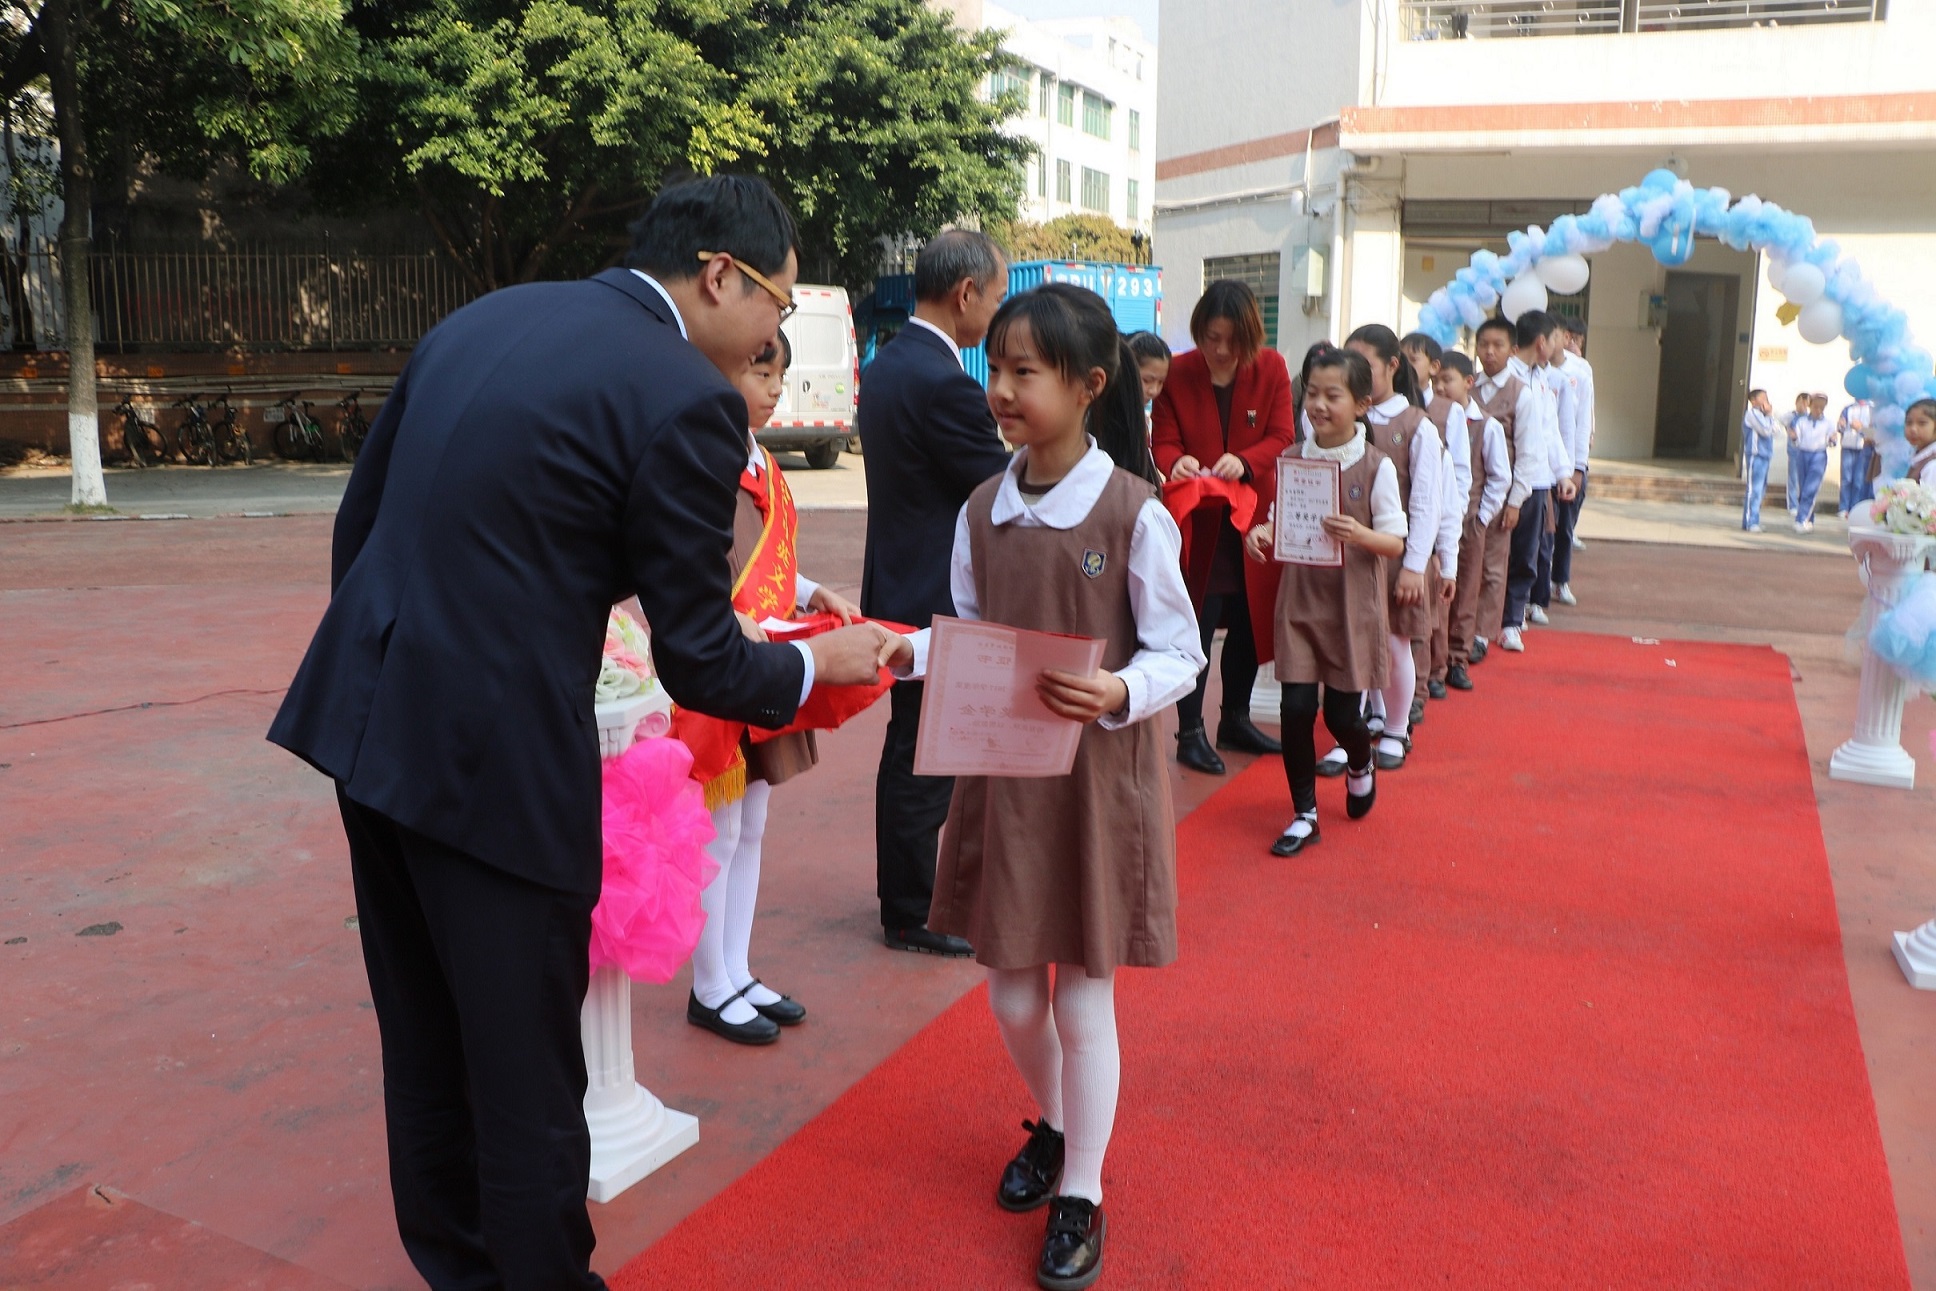 Walk the Red Carpet in School's Opening Ceremony